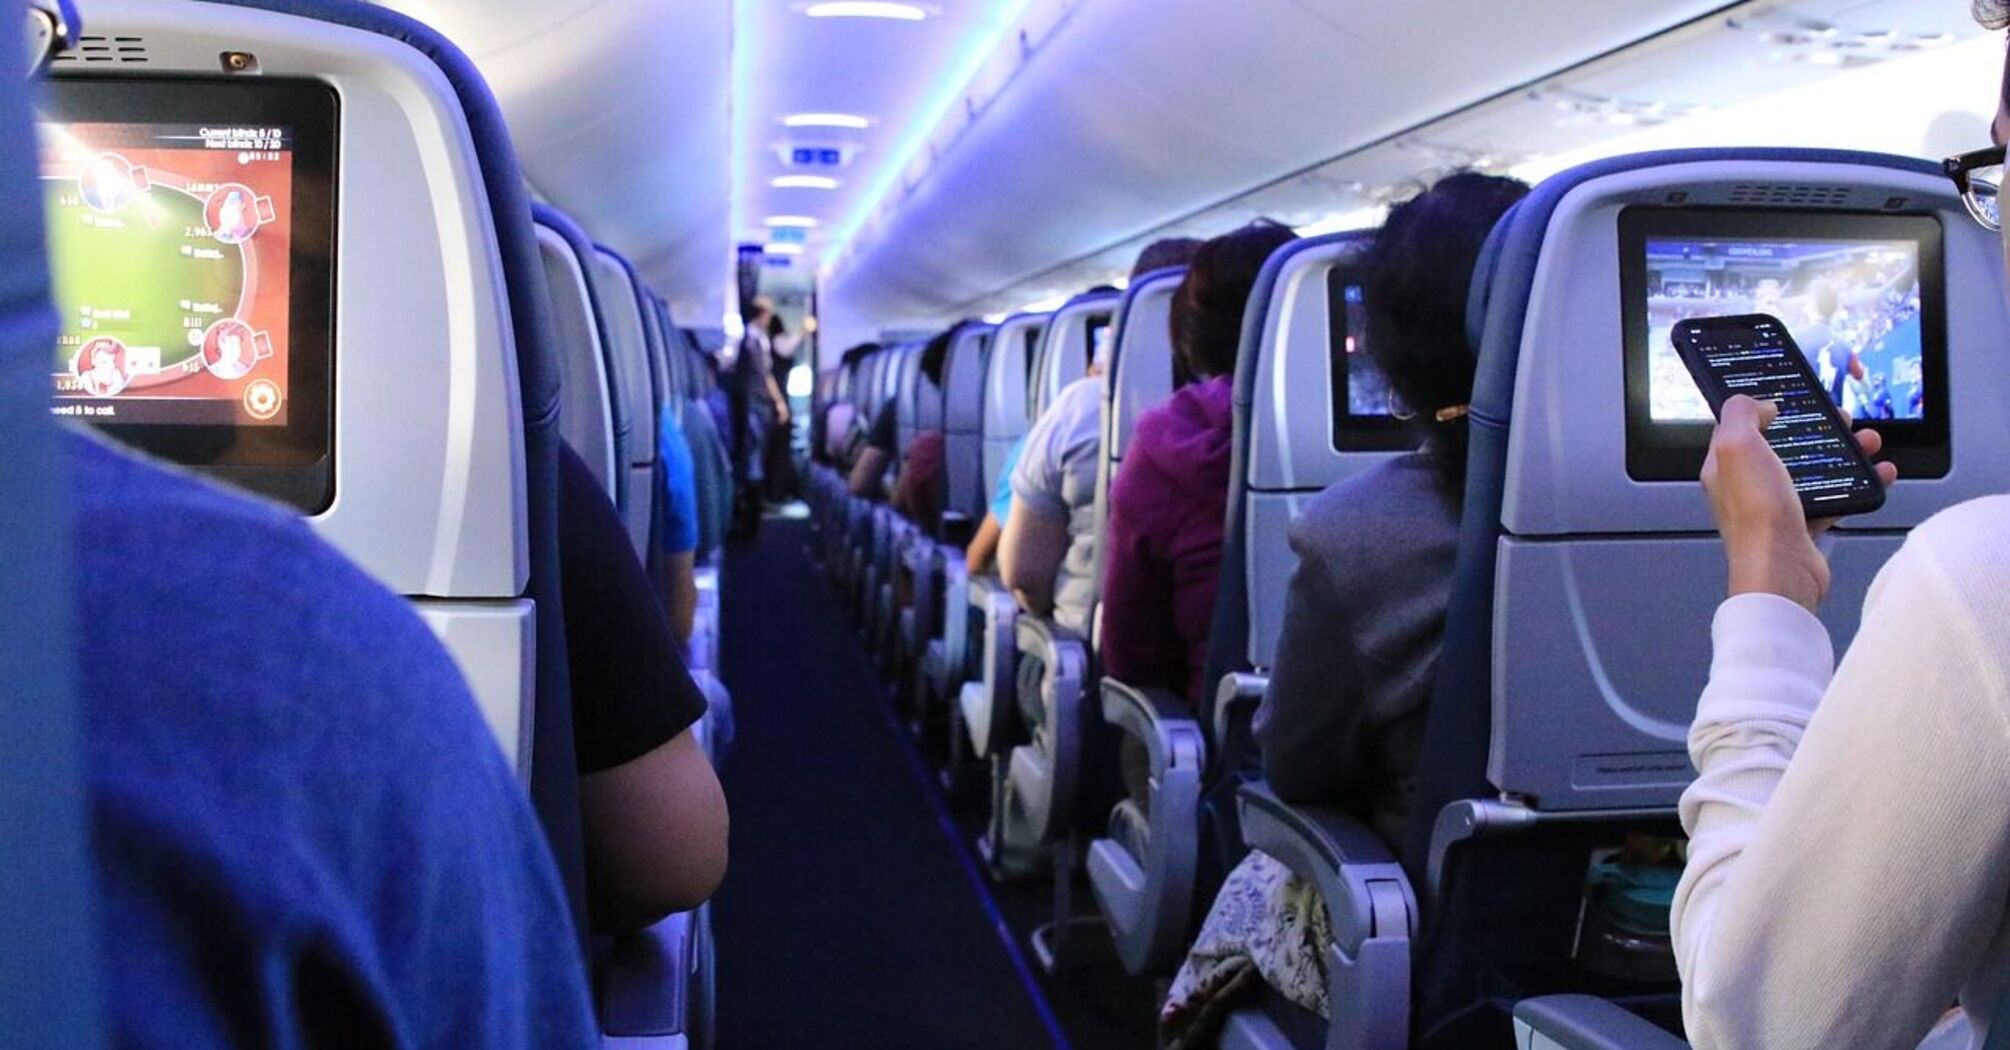 Air travel is safe despite recent incidents: respondents' opinion